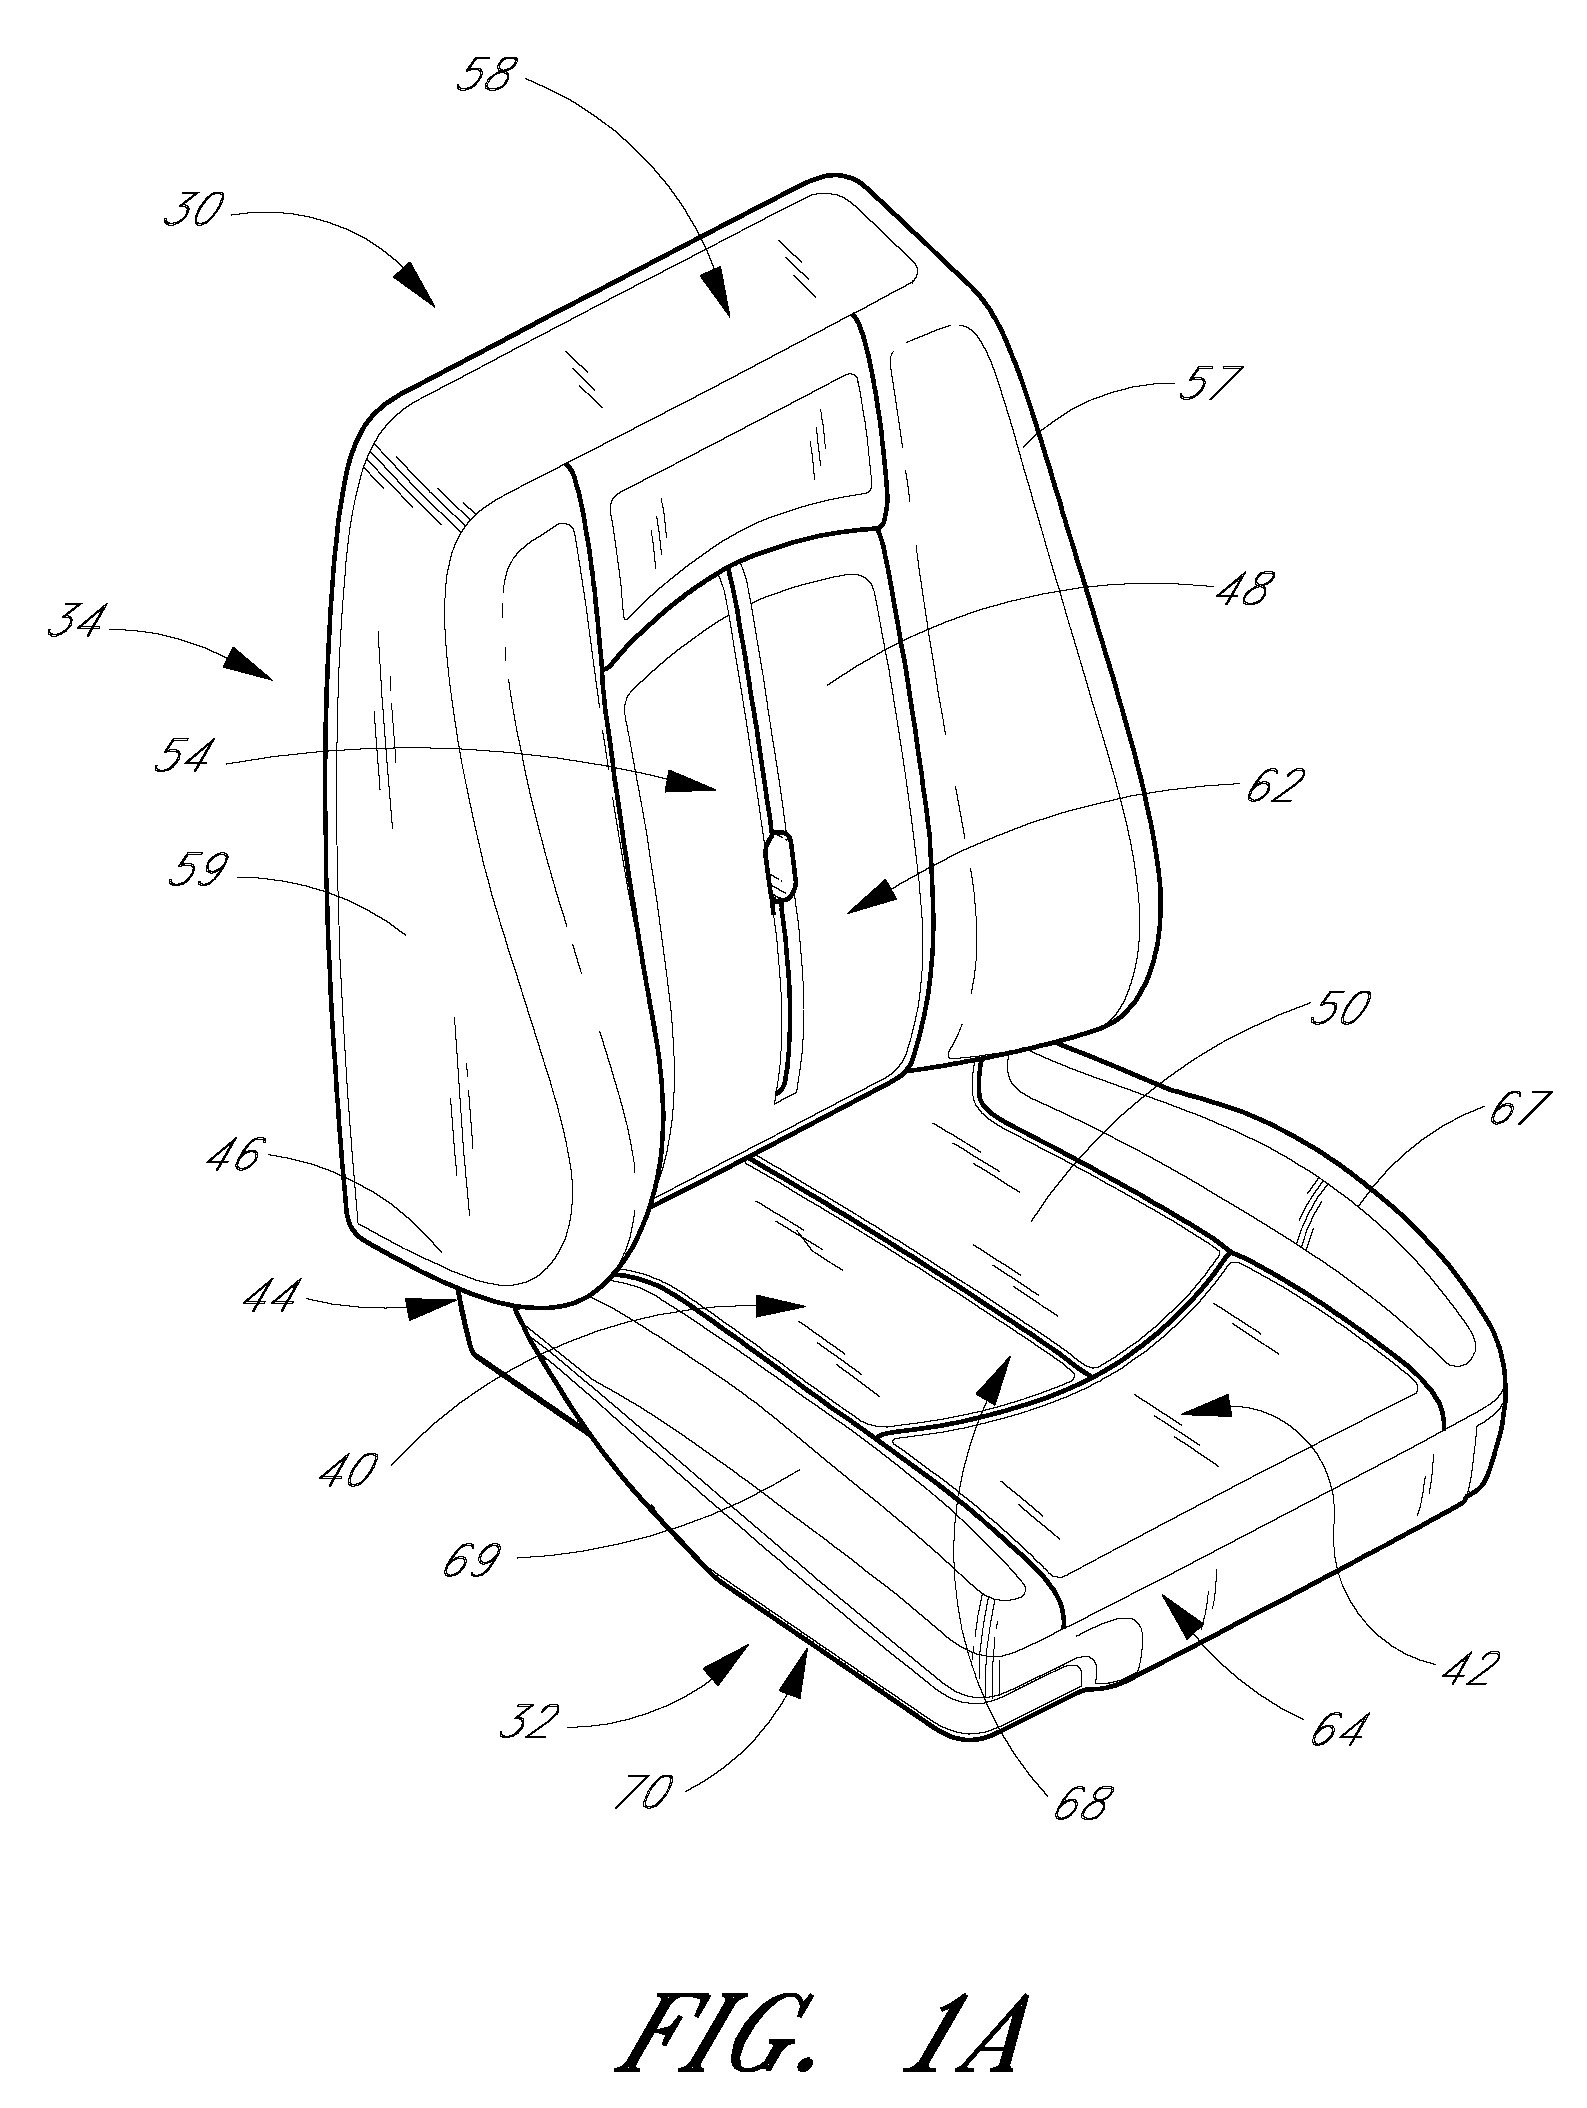 Clamp for climate control device